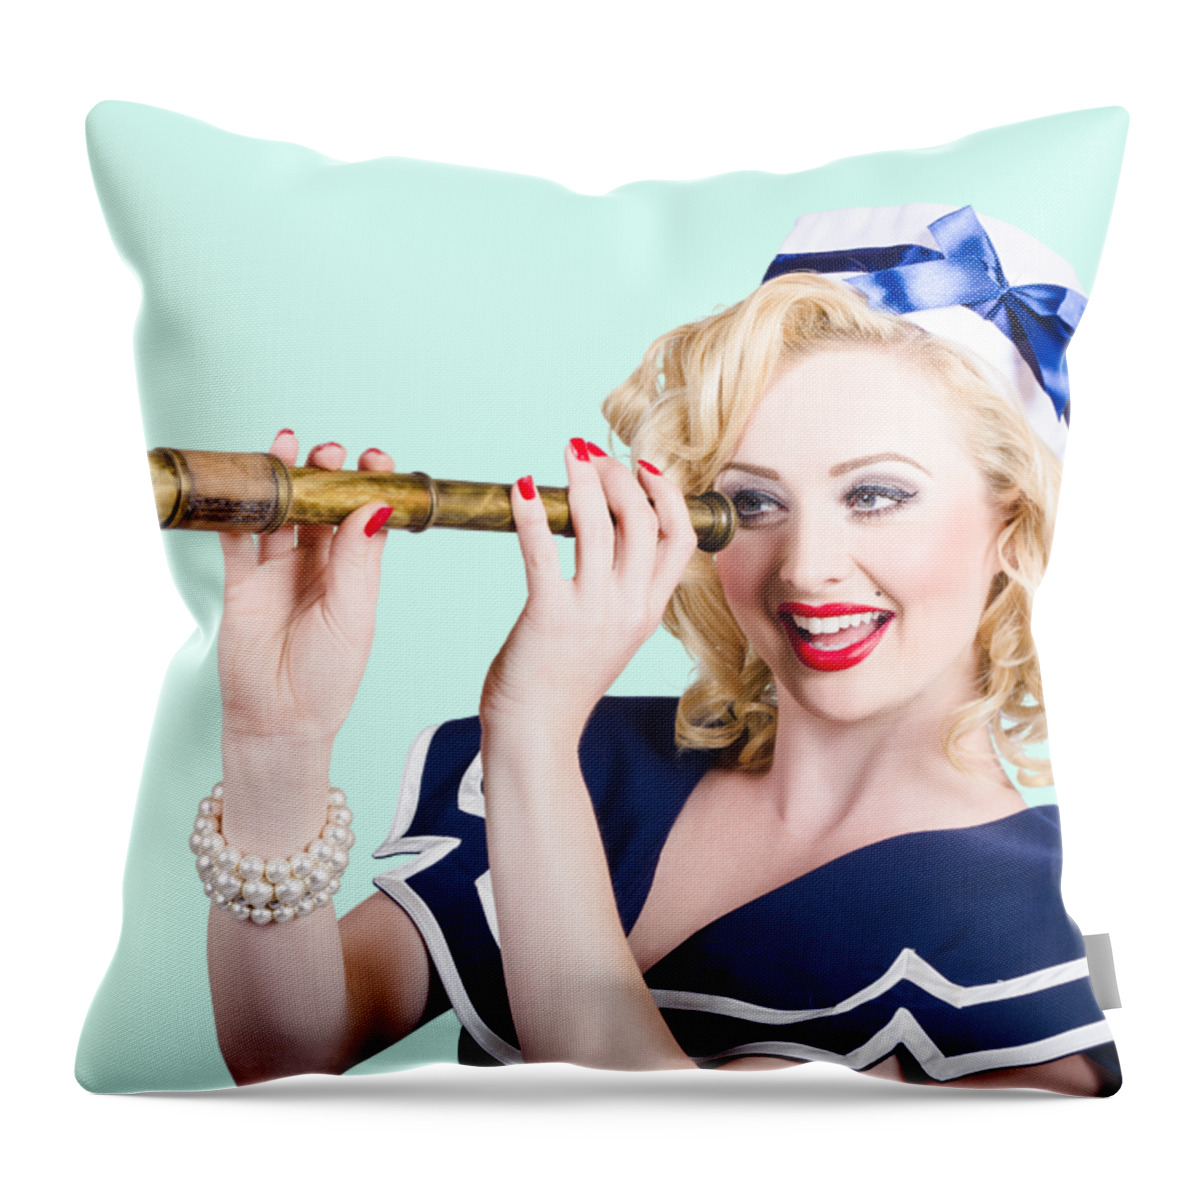 Woman Throw Pillow featuring the photograph Attractive pinup sailor girl with a monocular by Jorgo Photography